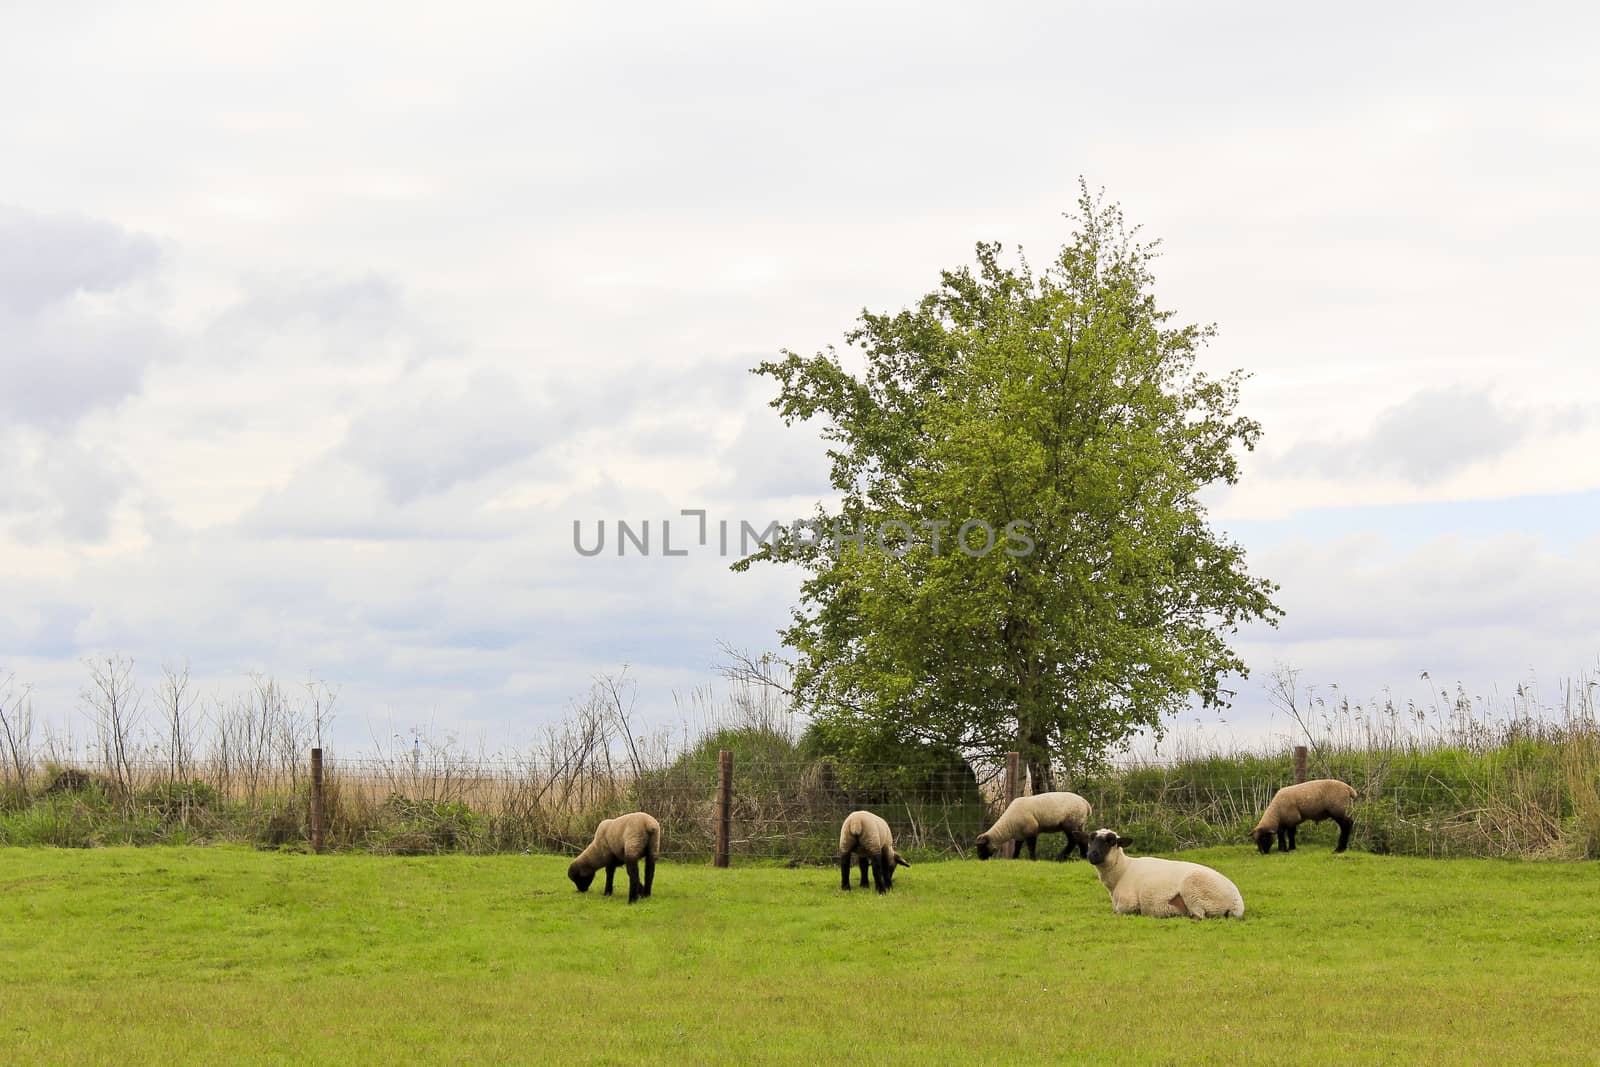 Flock of sheep on lonely tree in the countryside in Lower Saxony, Germany.